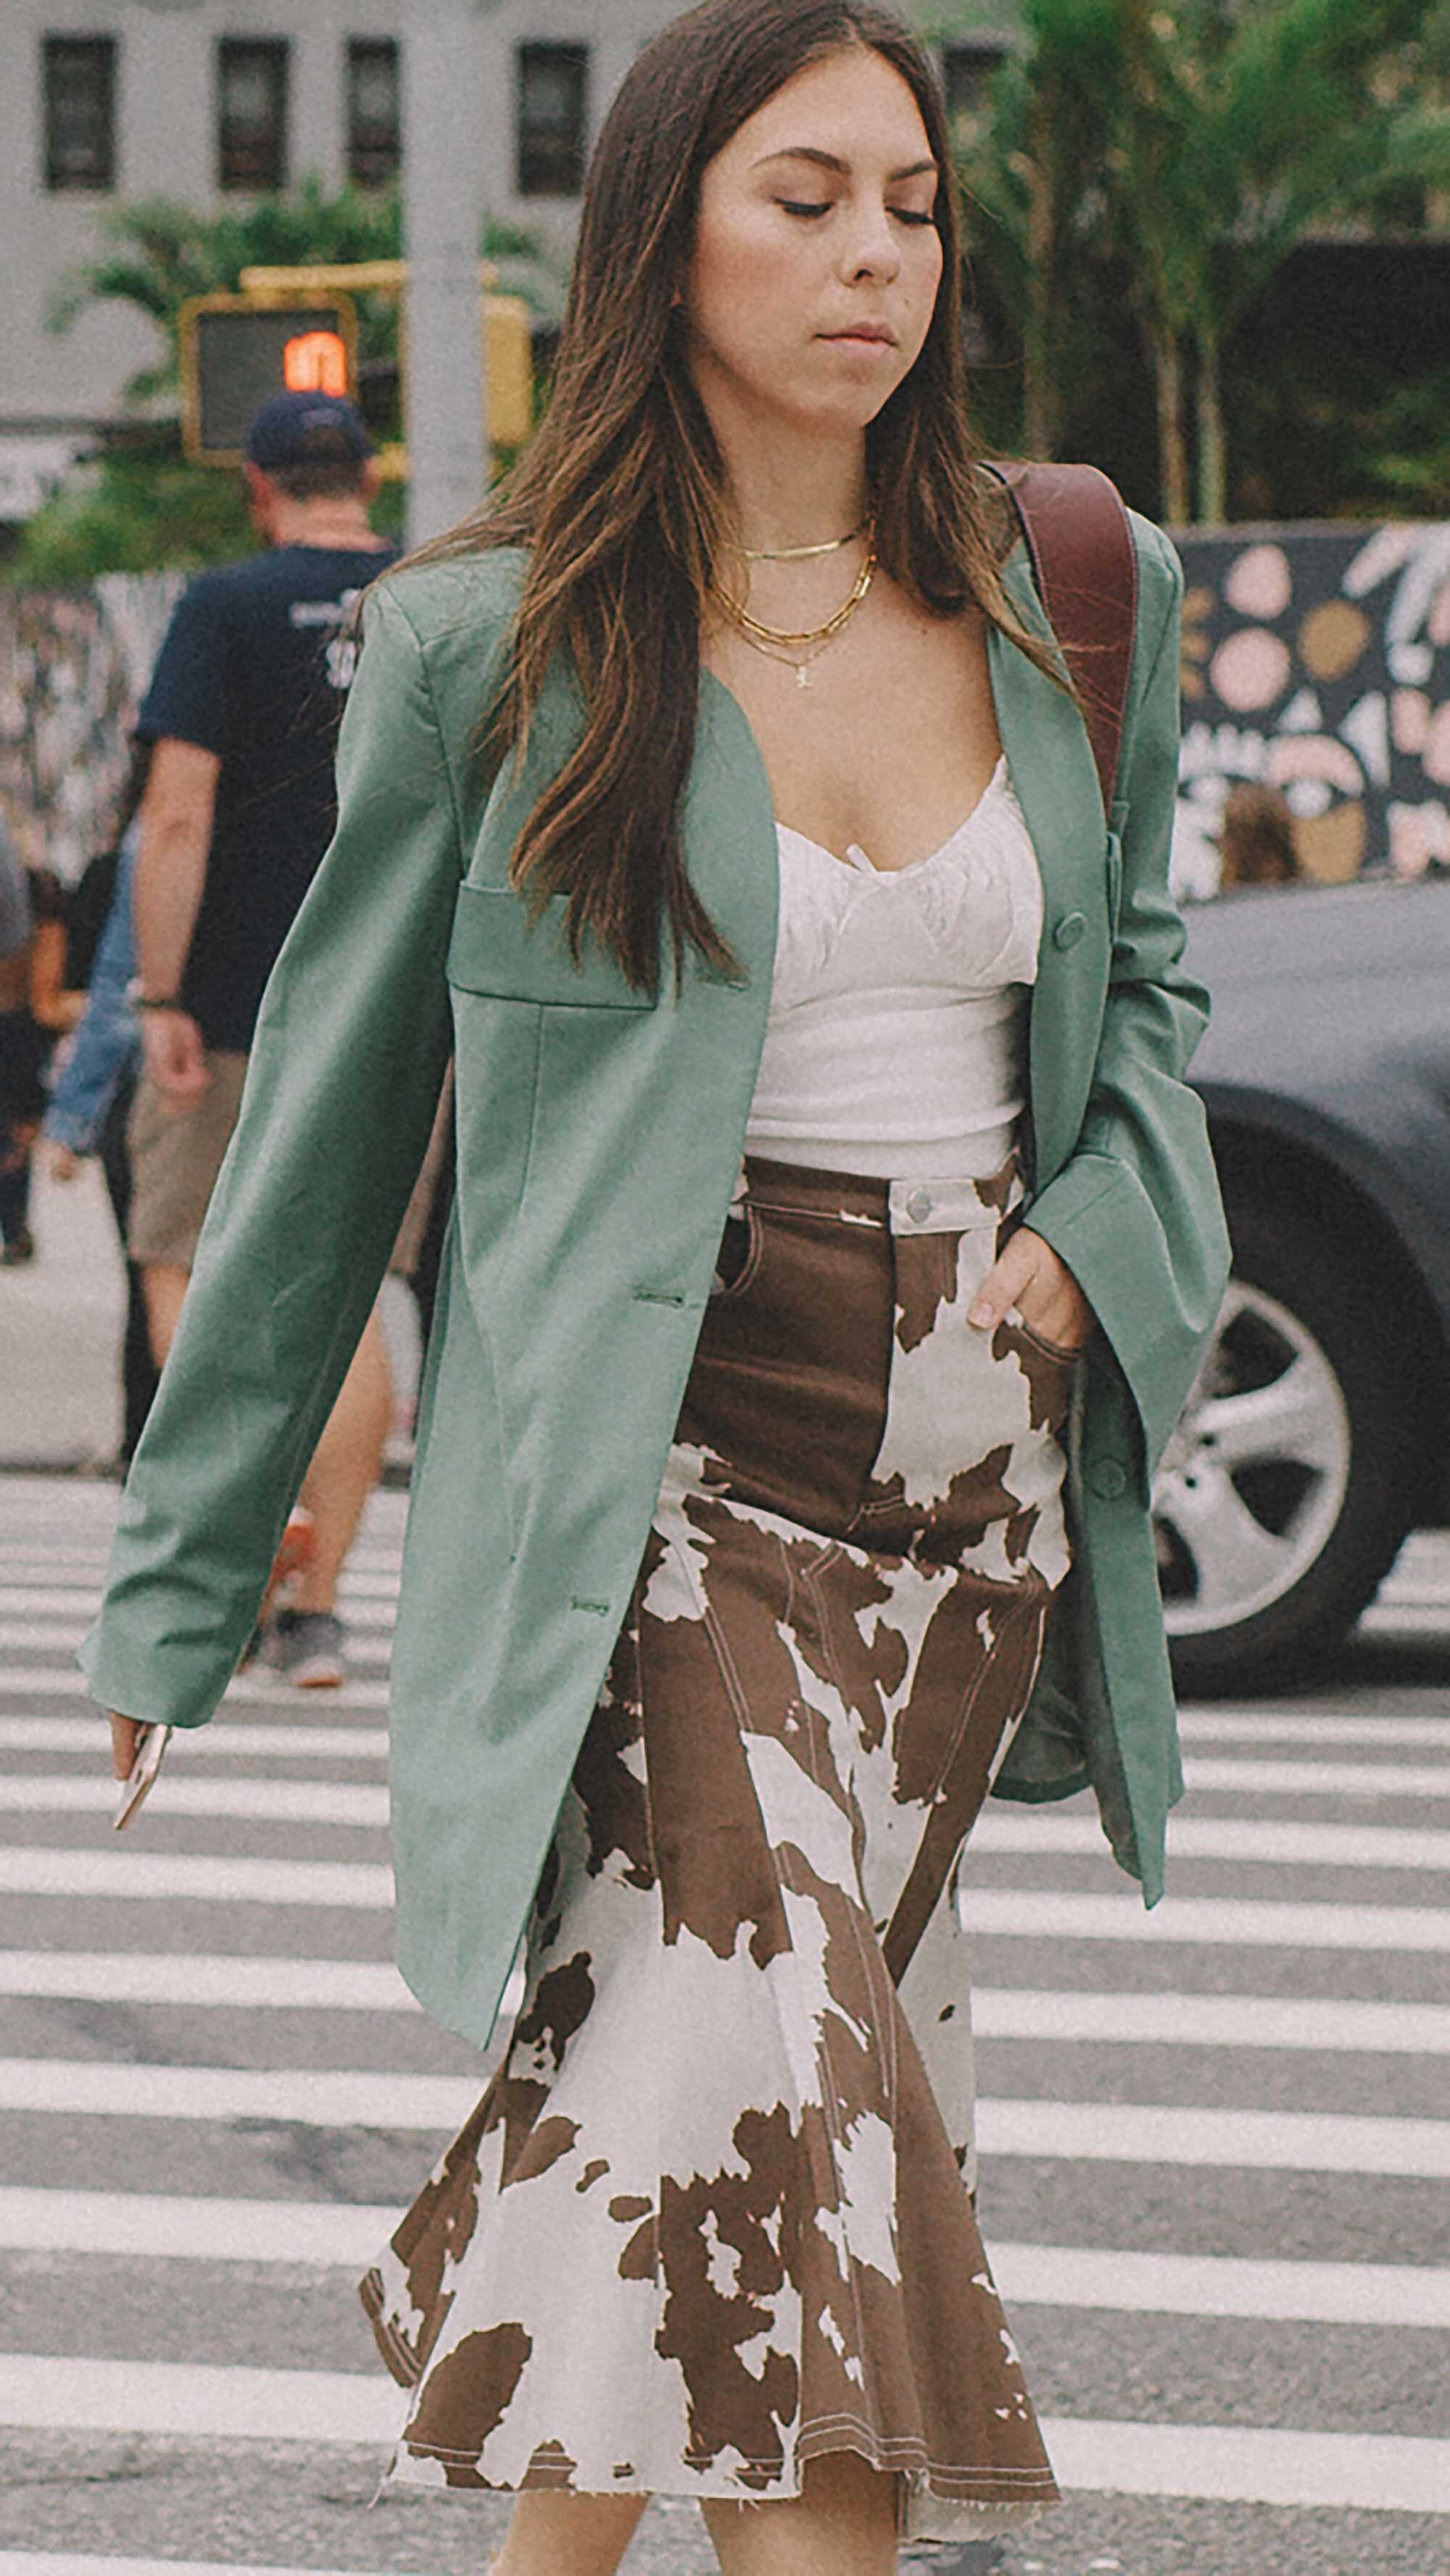 Best outfits of New York Fashion Week street style -75.jpg